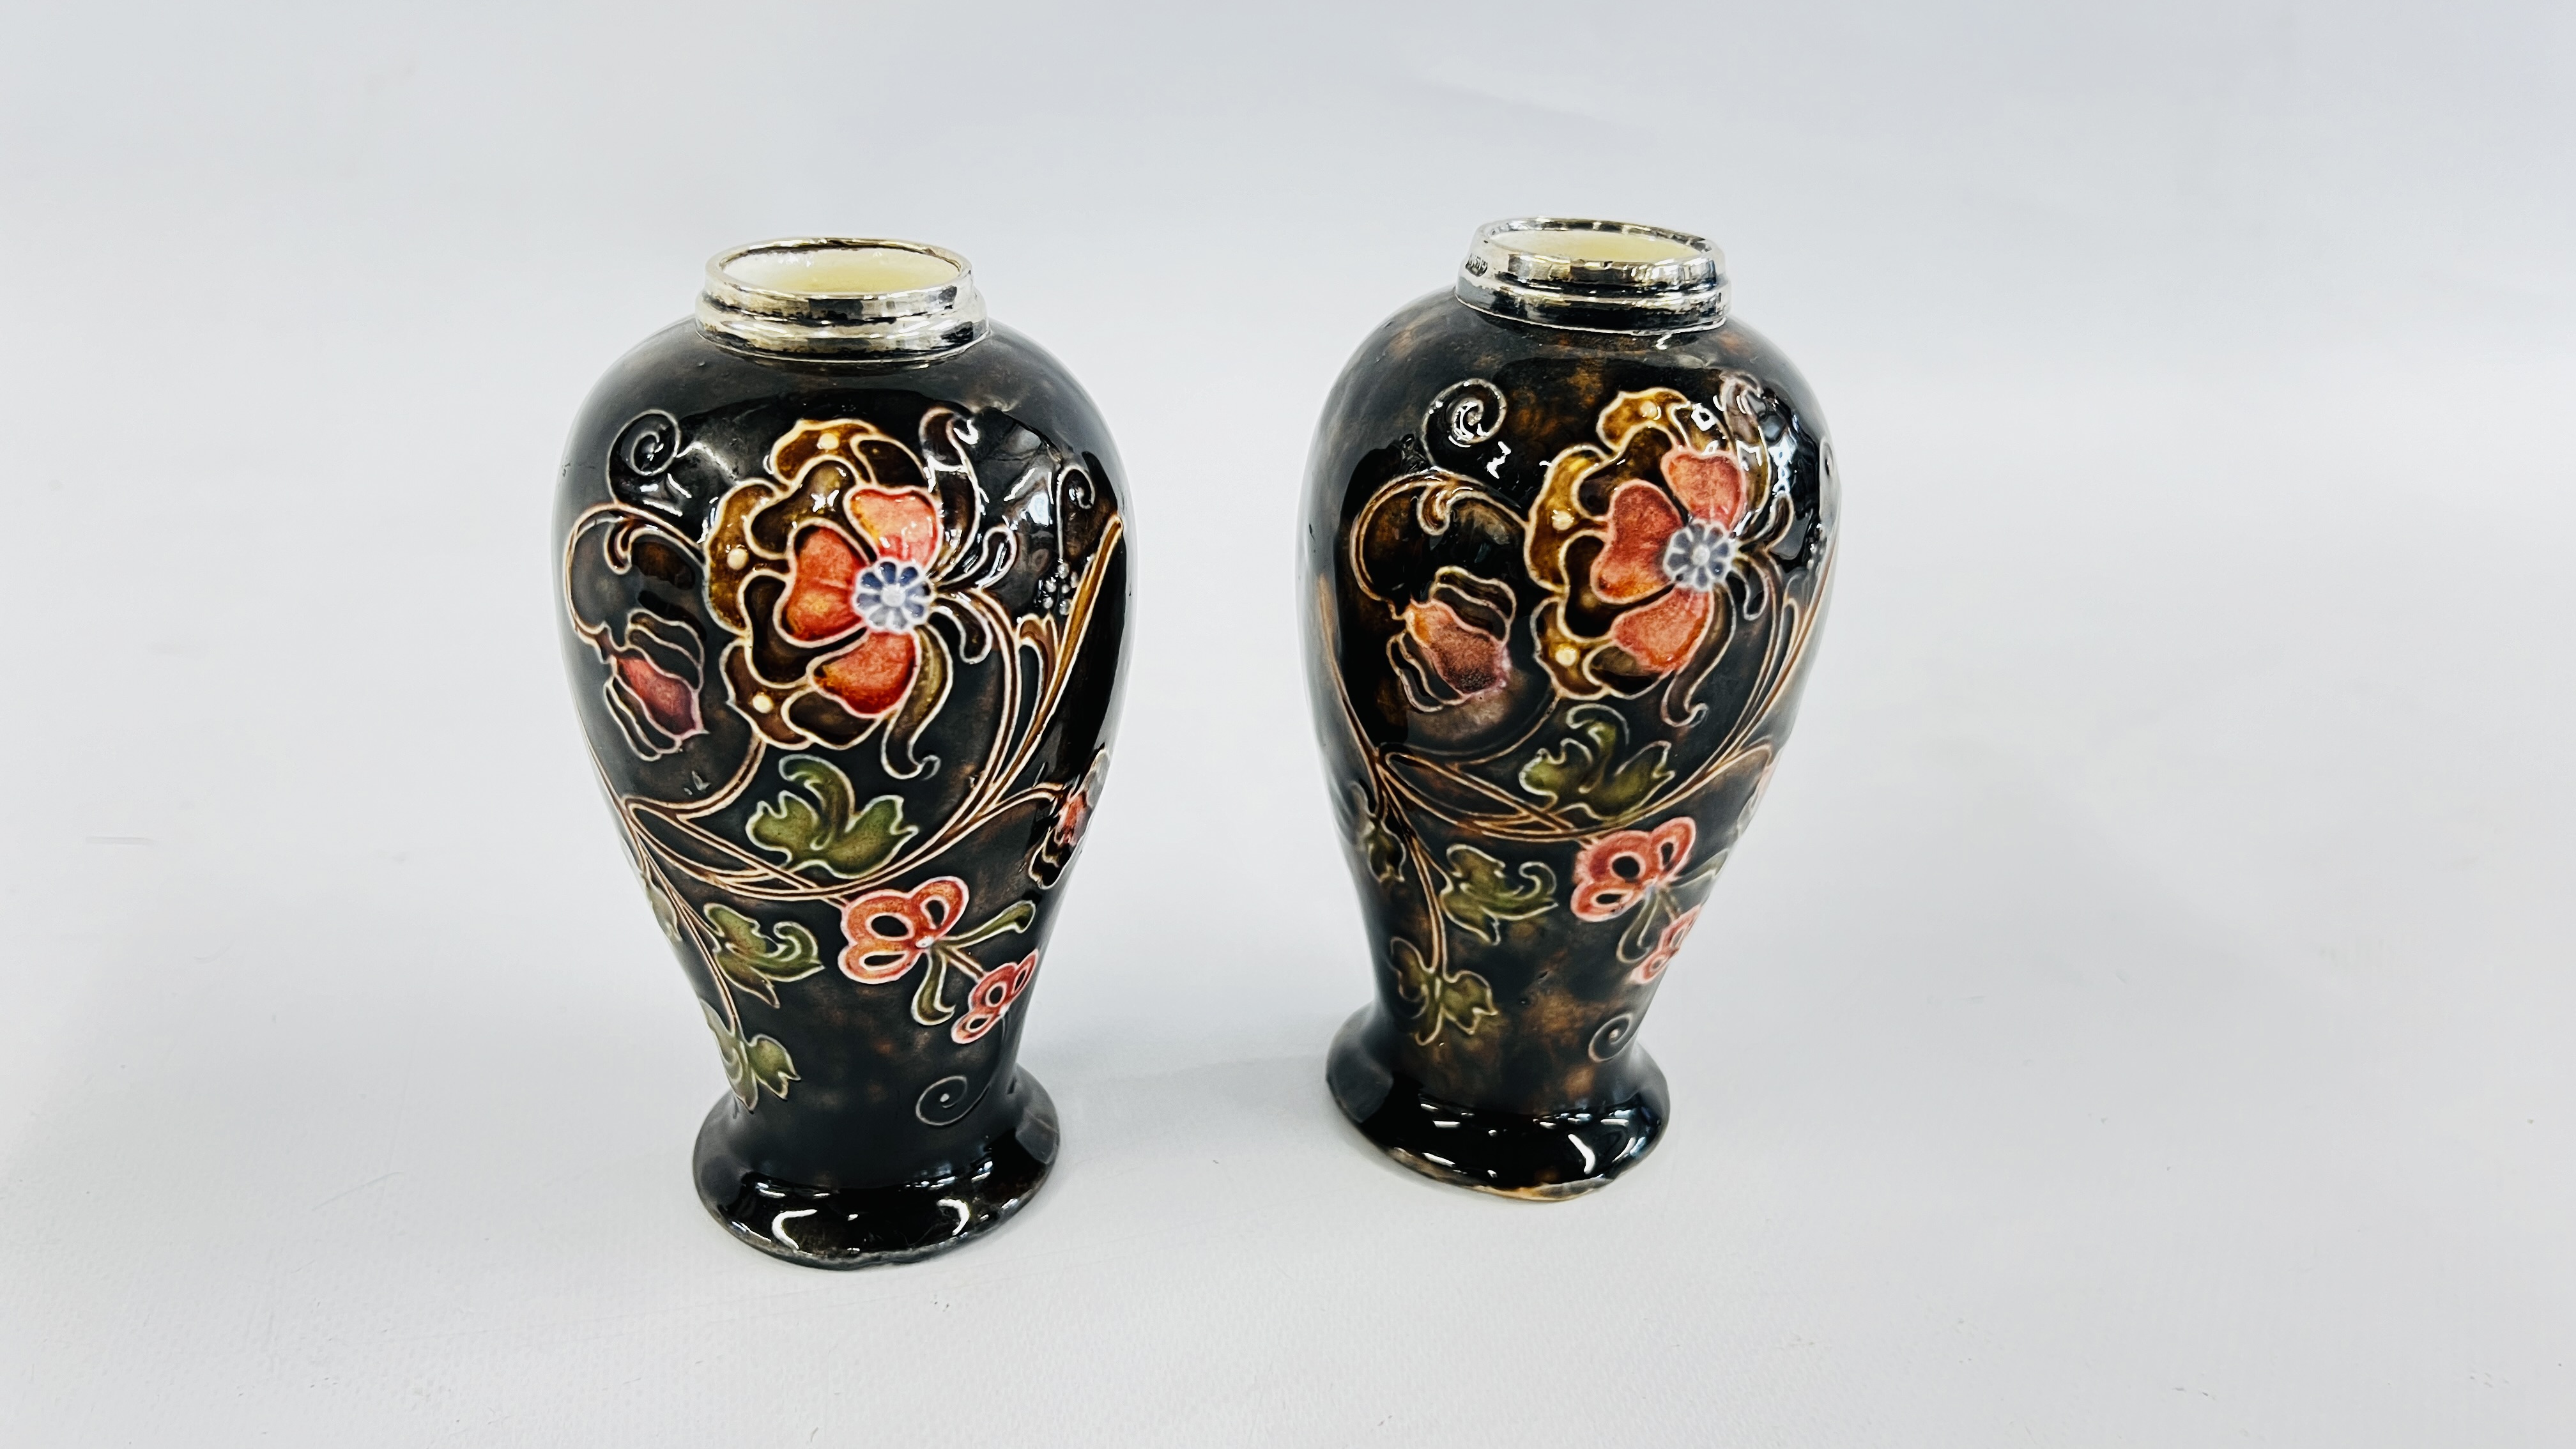 A PAIR OF VINTAGE SILVER RIMMED GLAZED VASES IN THE MOORCROFT STYLE,